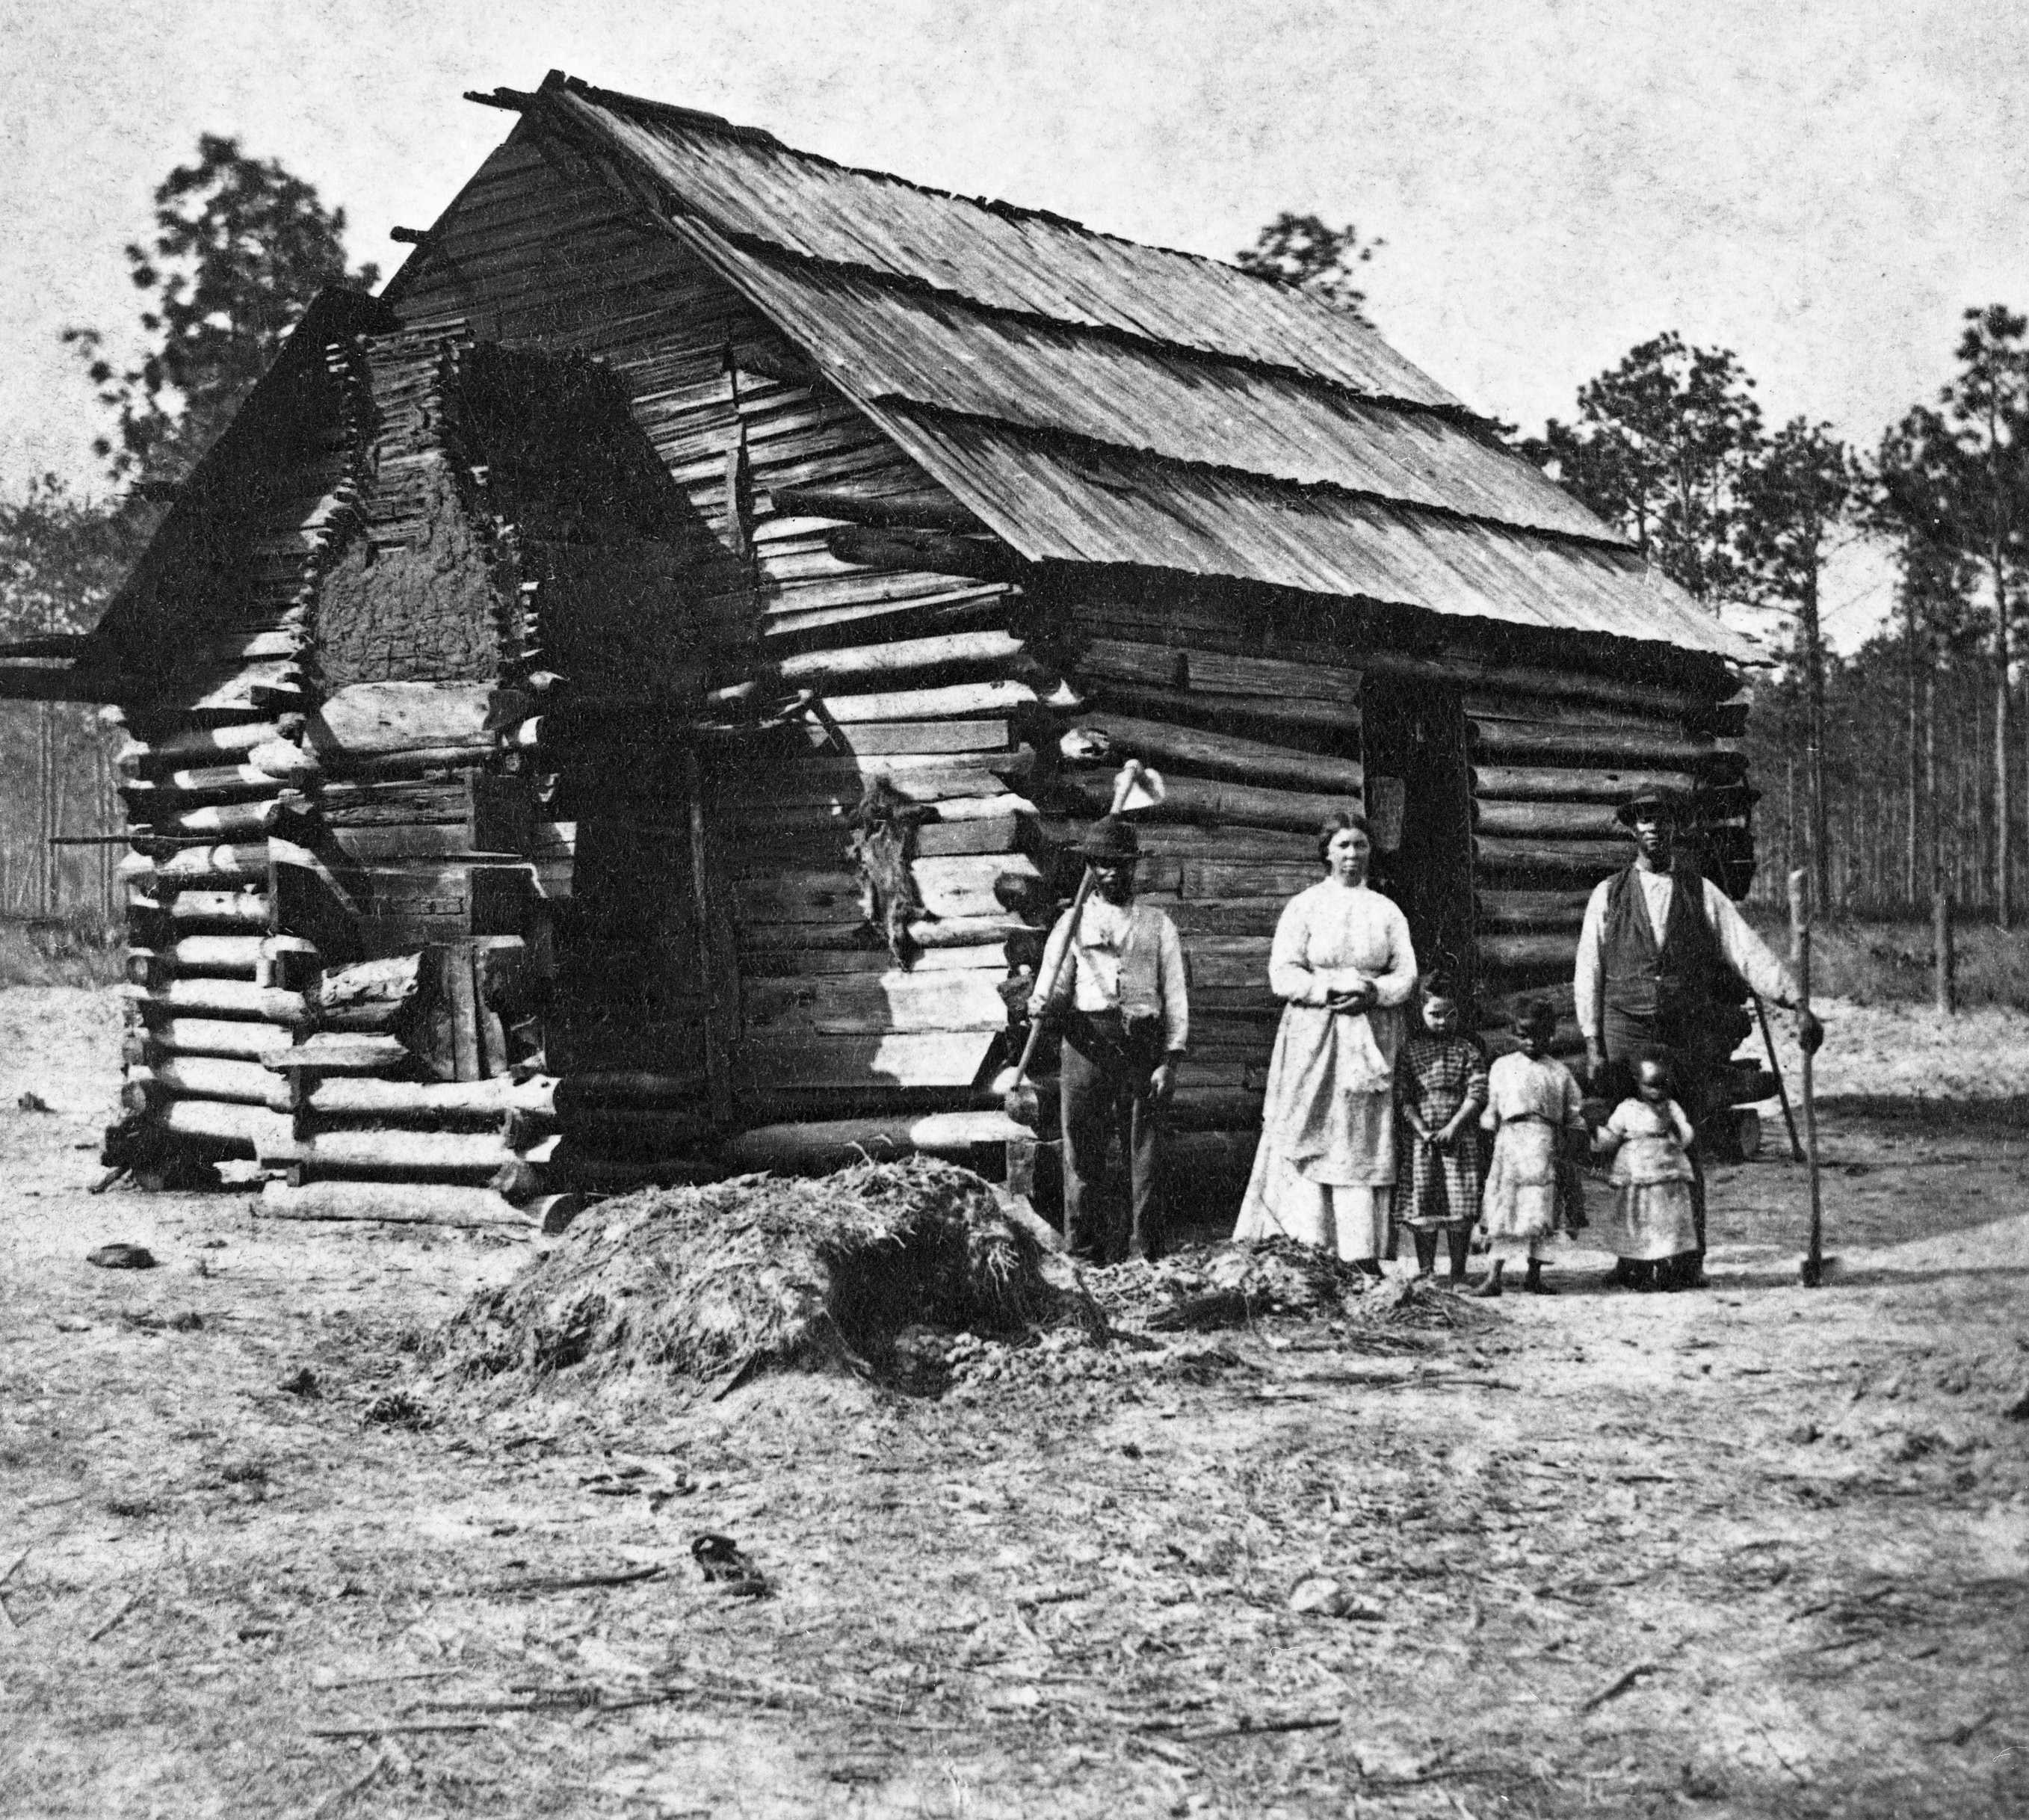 A black and white photo of a family of 5 posing for a photo in front a small log cabin.